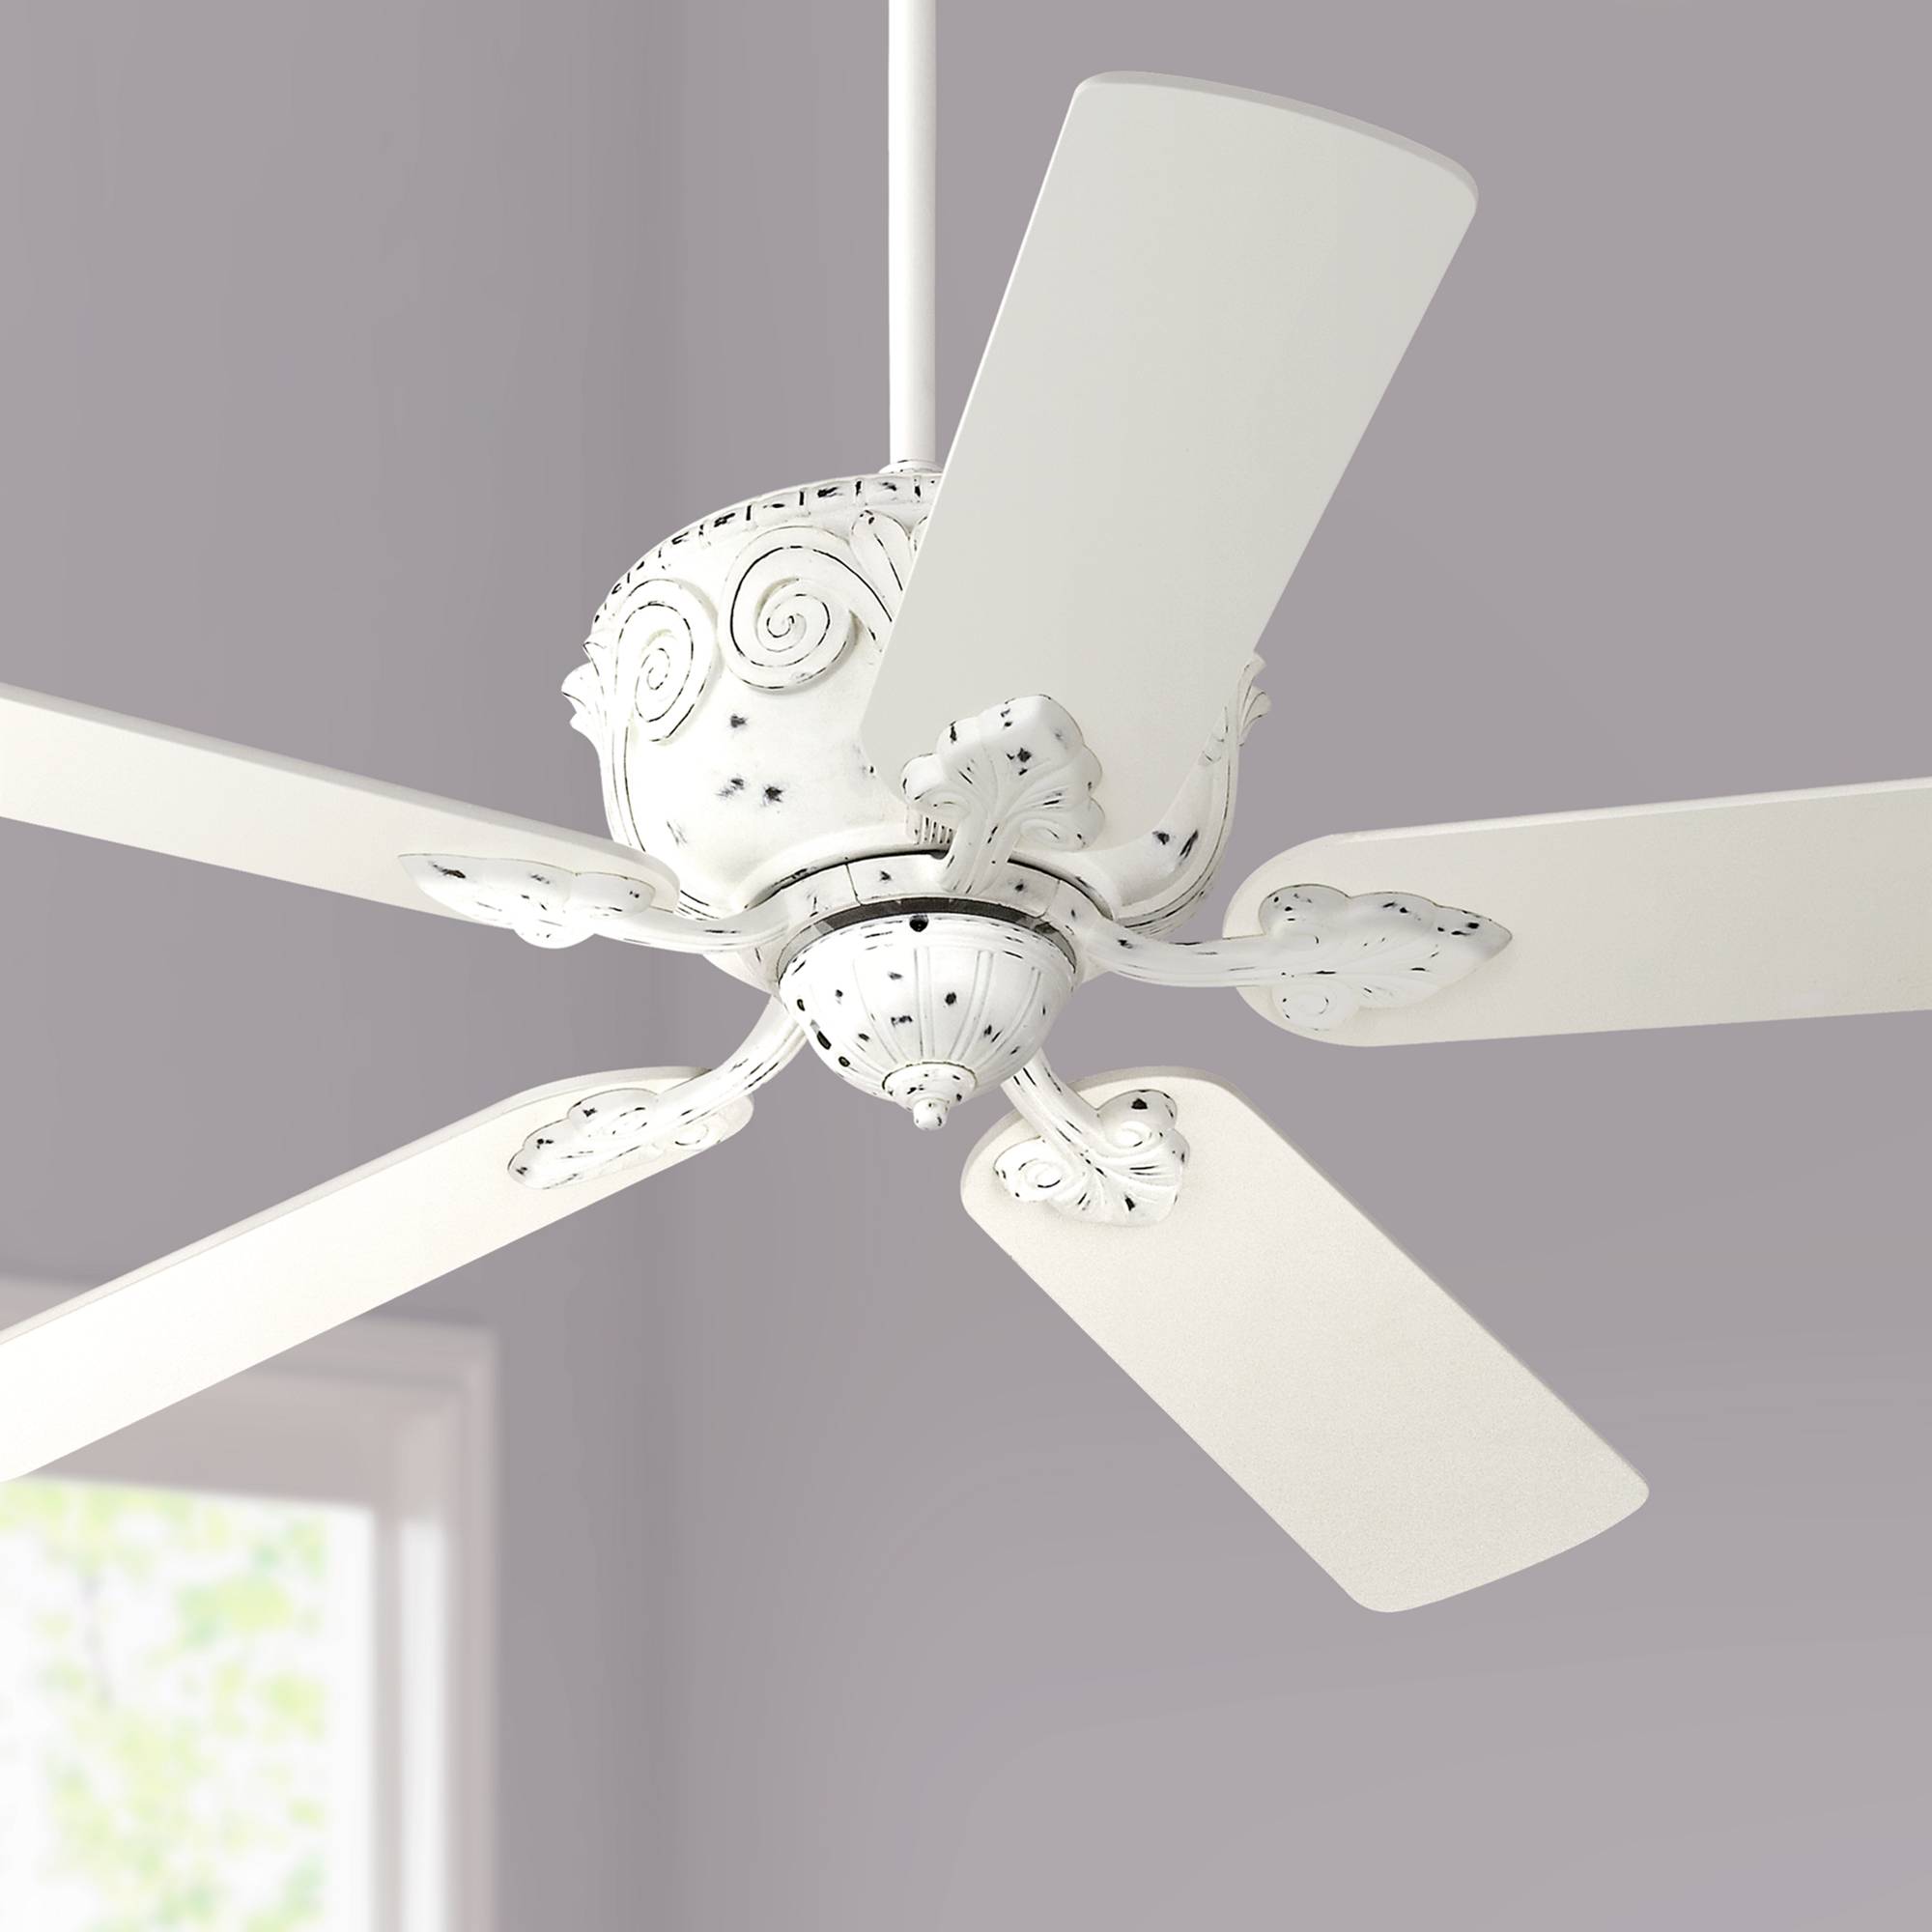 Details About 52 Shabby Chic Ceiling Fan Antique Rubbed White For Living Room Kitchen Bedroom